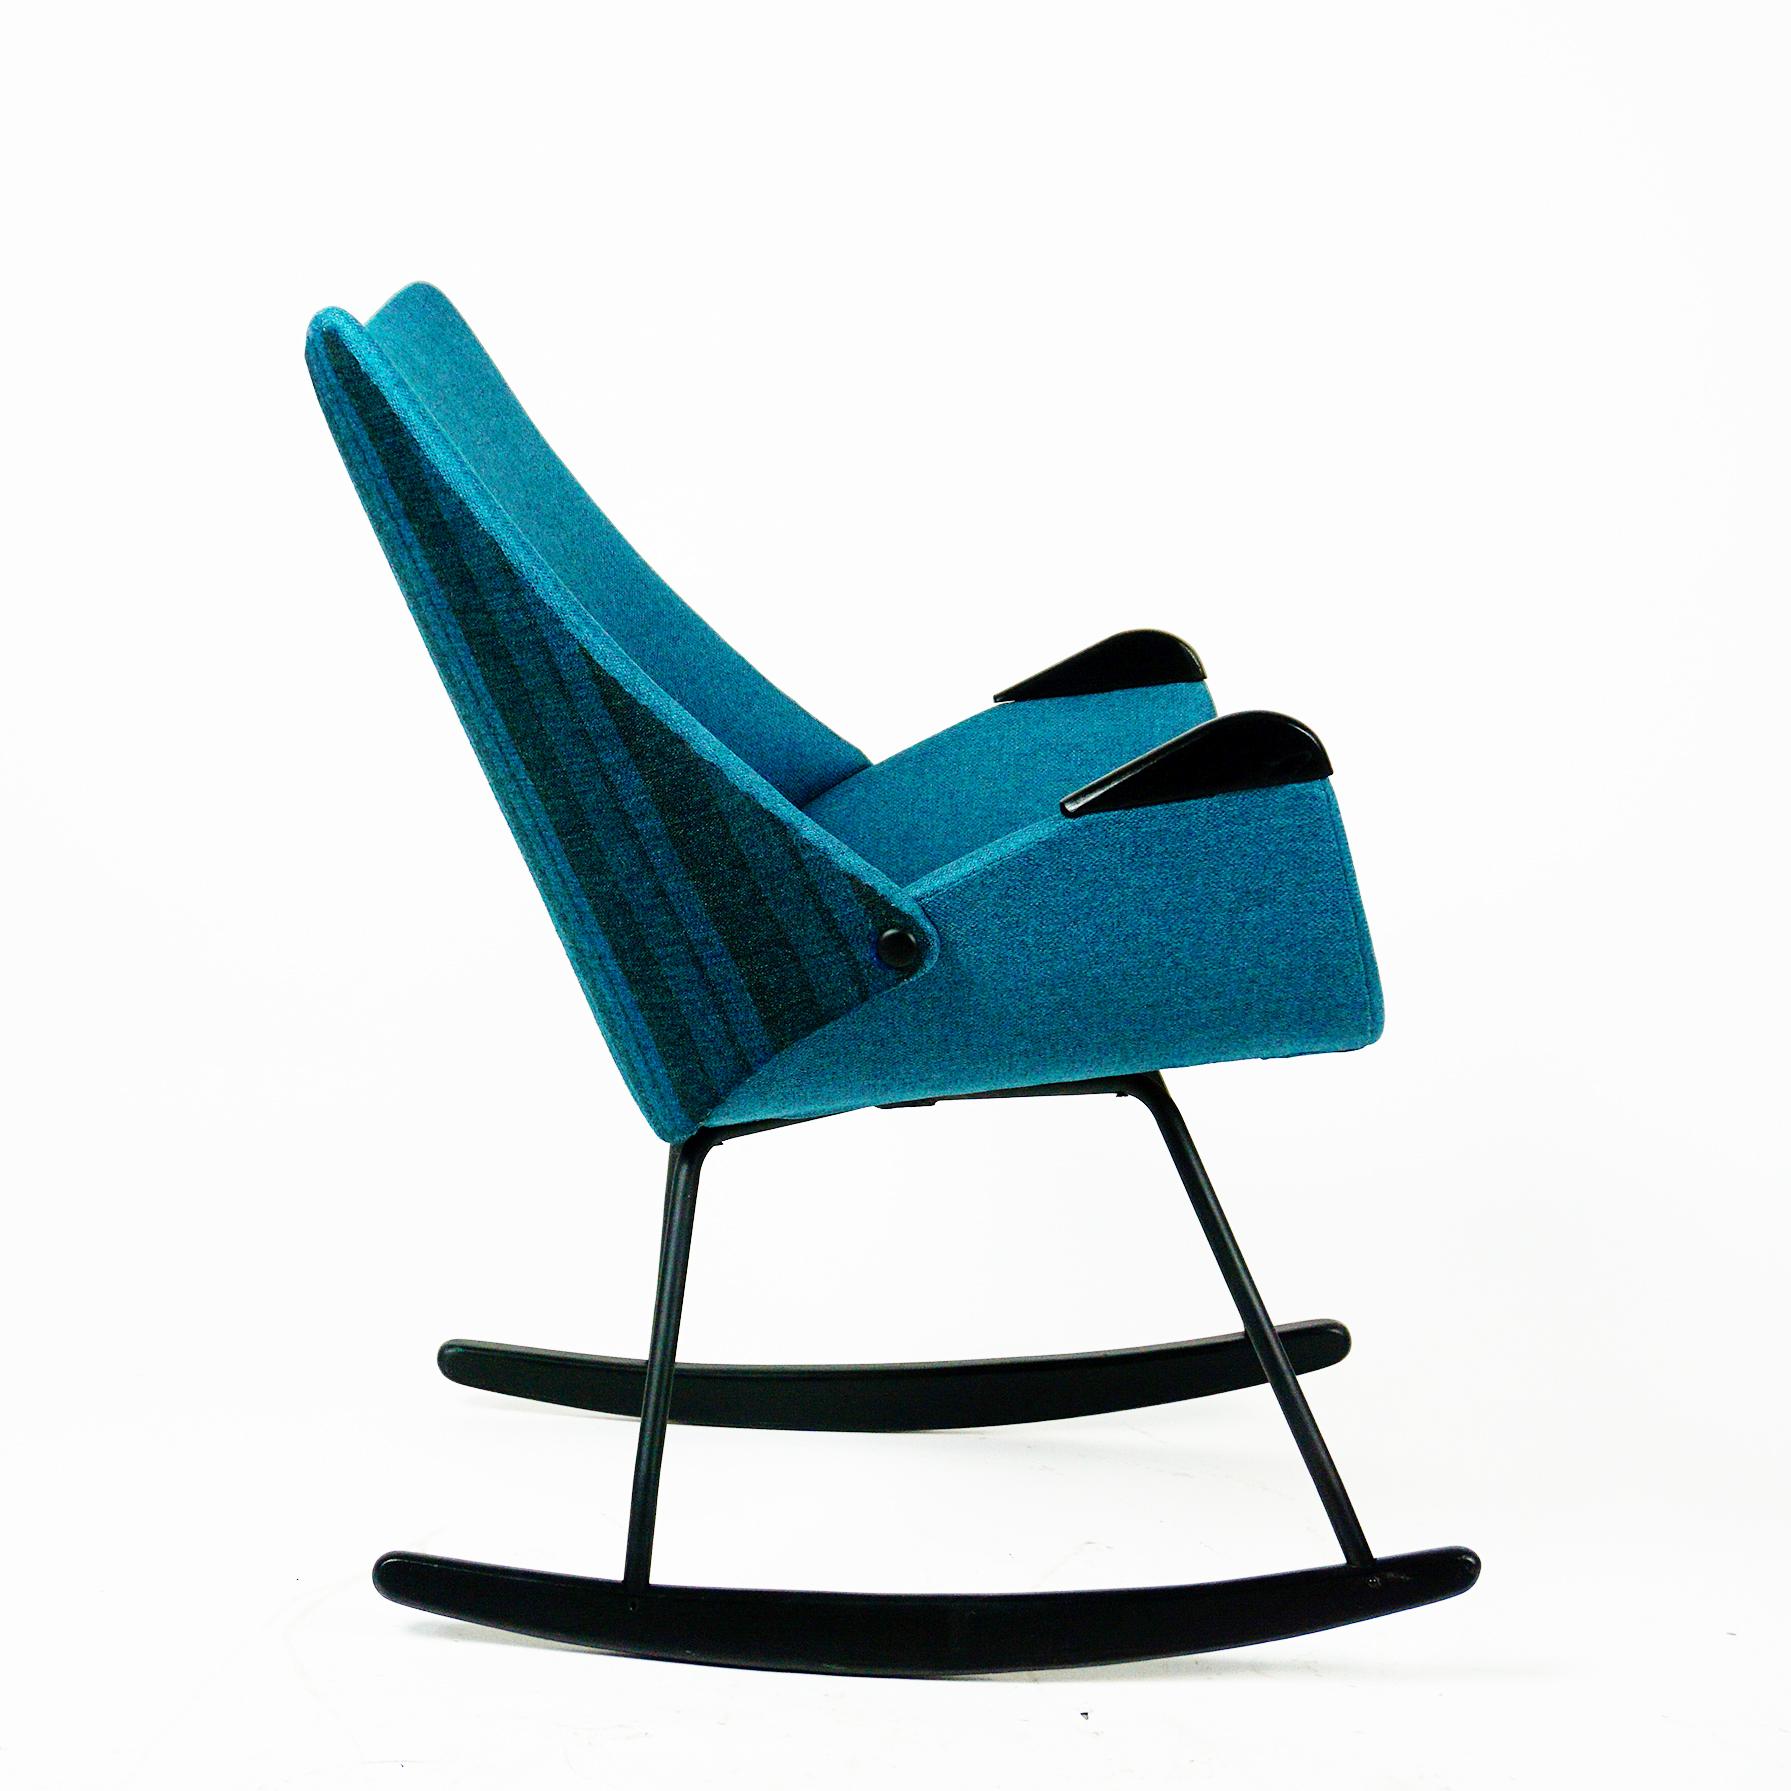 Mid-20th Century Black Lacquered Scandinavian Shell Seat Rocking Chair with Blue Fabric